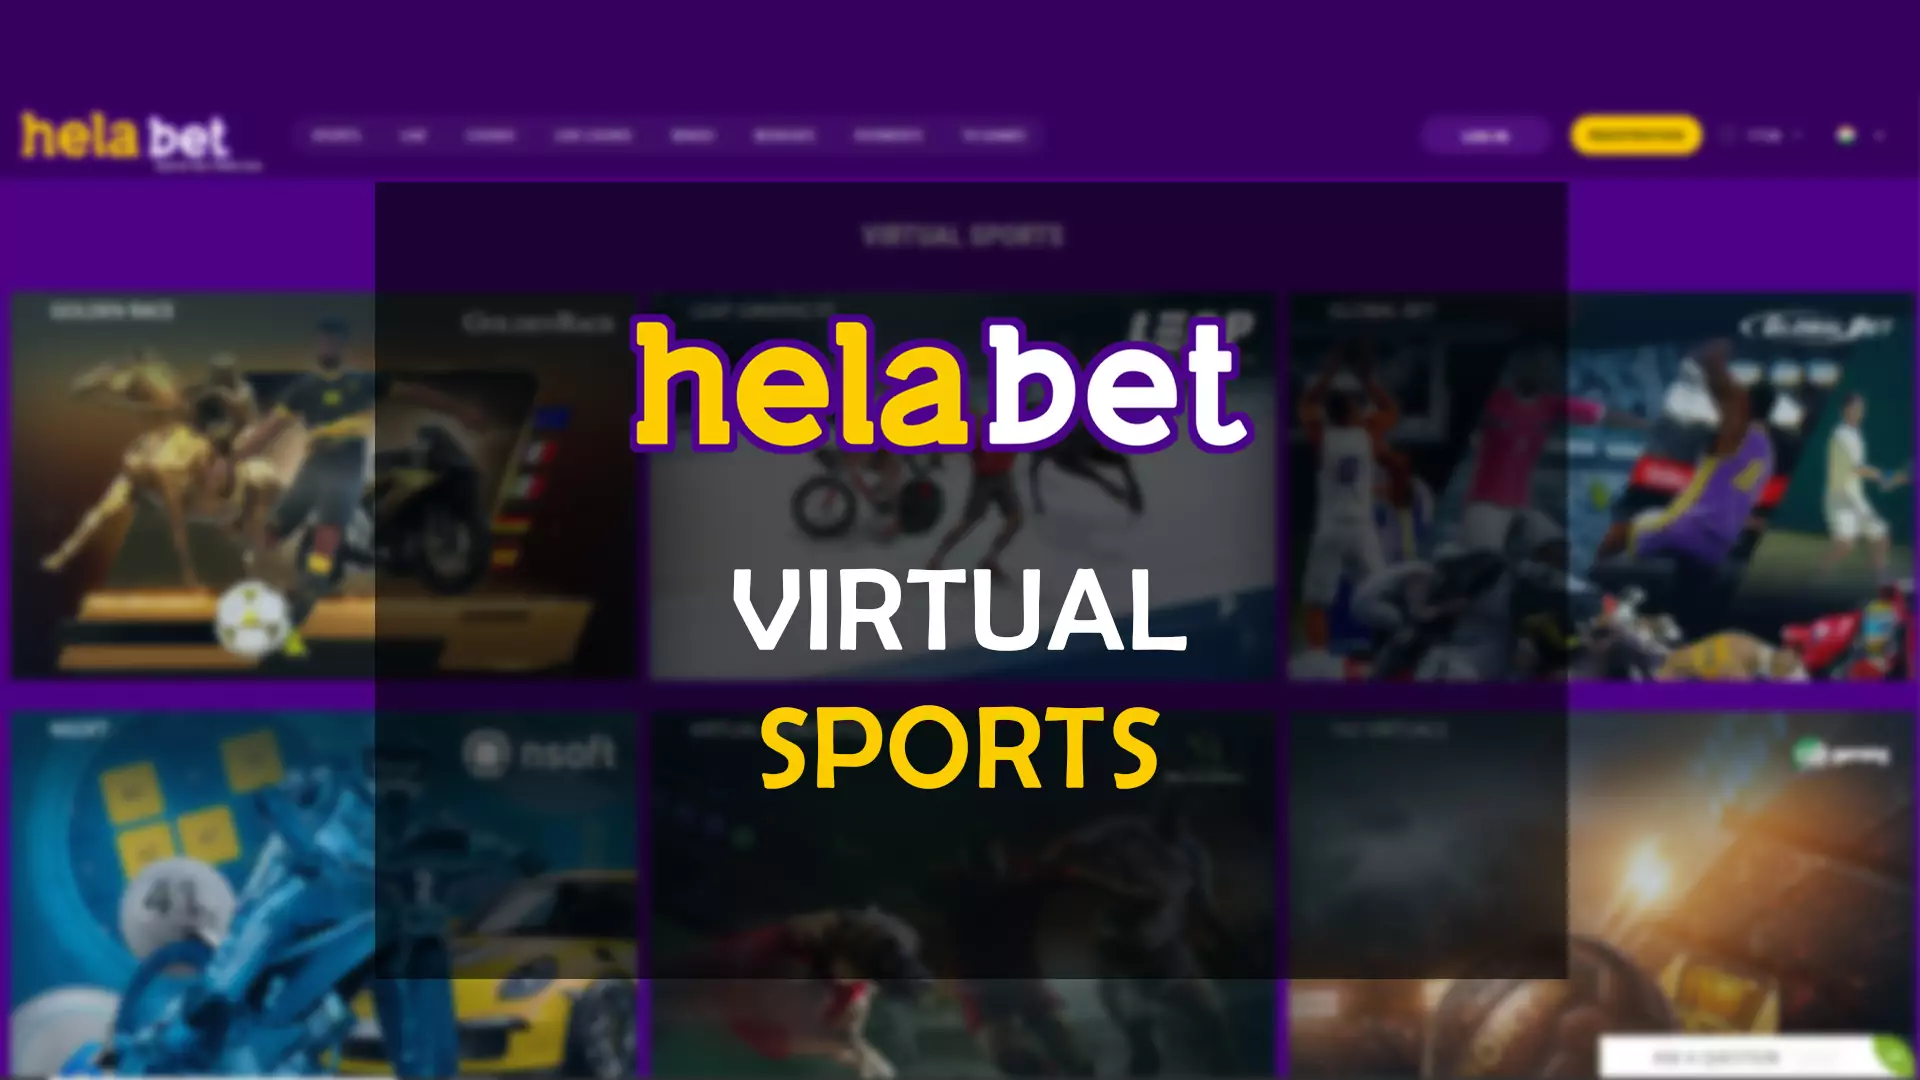 Virtual sports betting is available in Helabet.